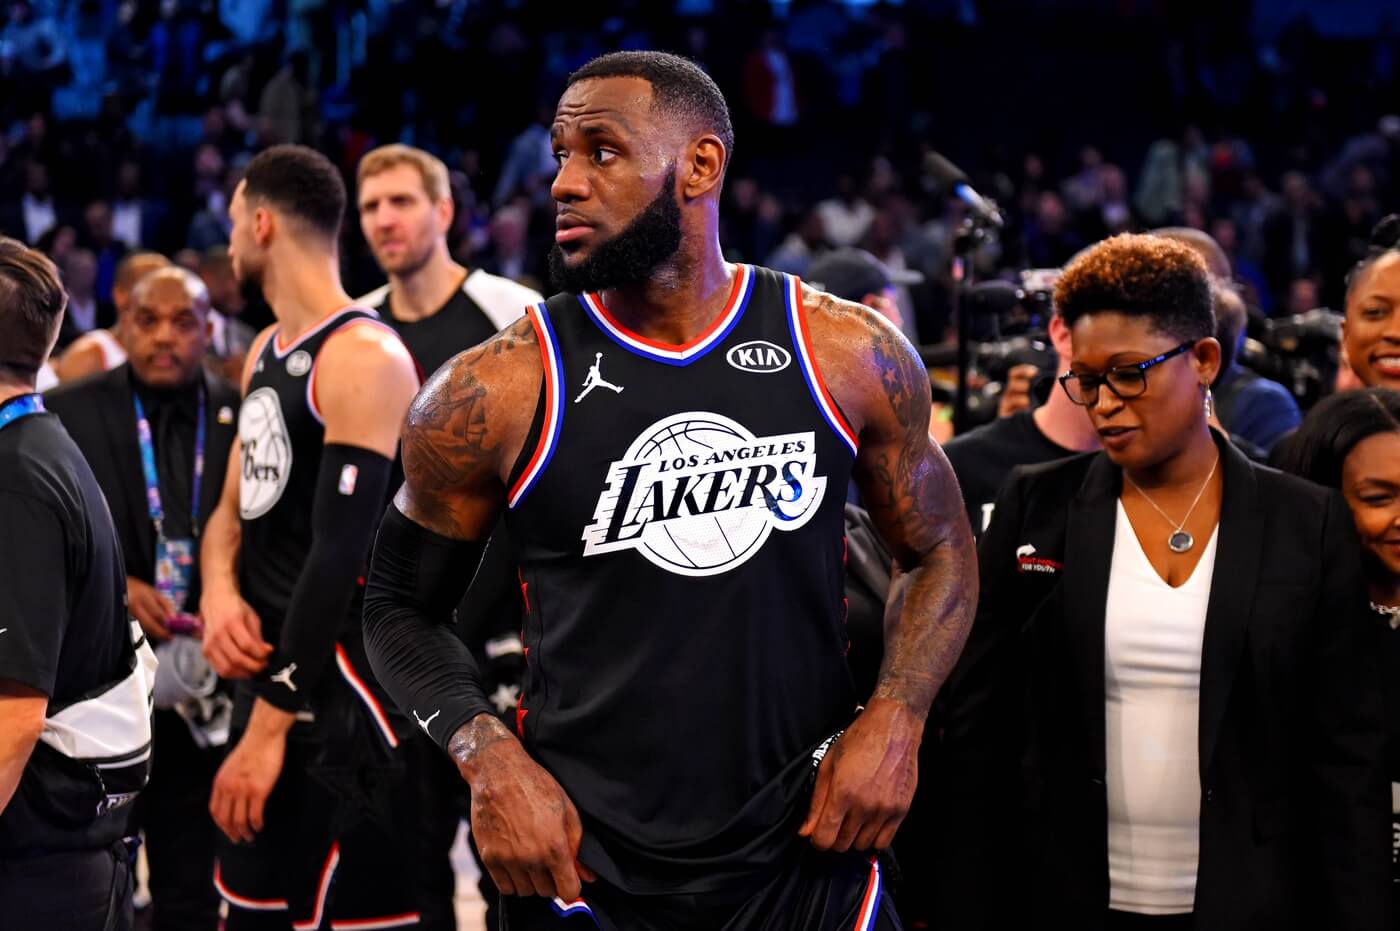 Feb 17, 2019; Charlotte, NC, USA; Team Lebron forward Lebron James of the Los Angeles Lakers (23) after the 2019 NBA All-Star Game at Spectrum Center.